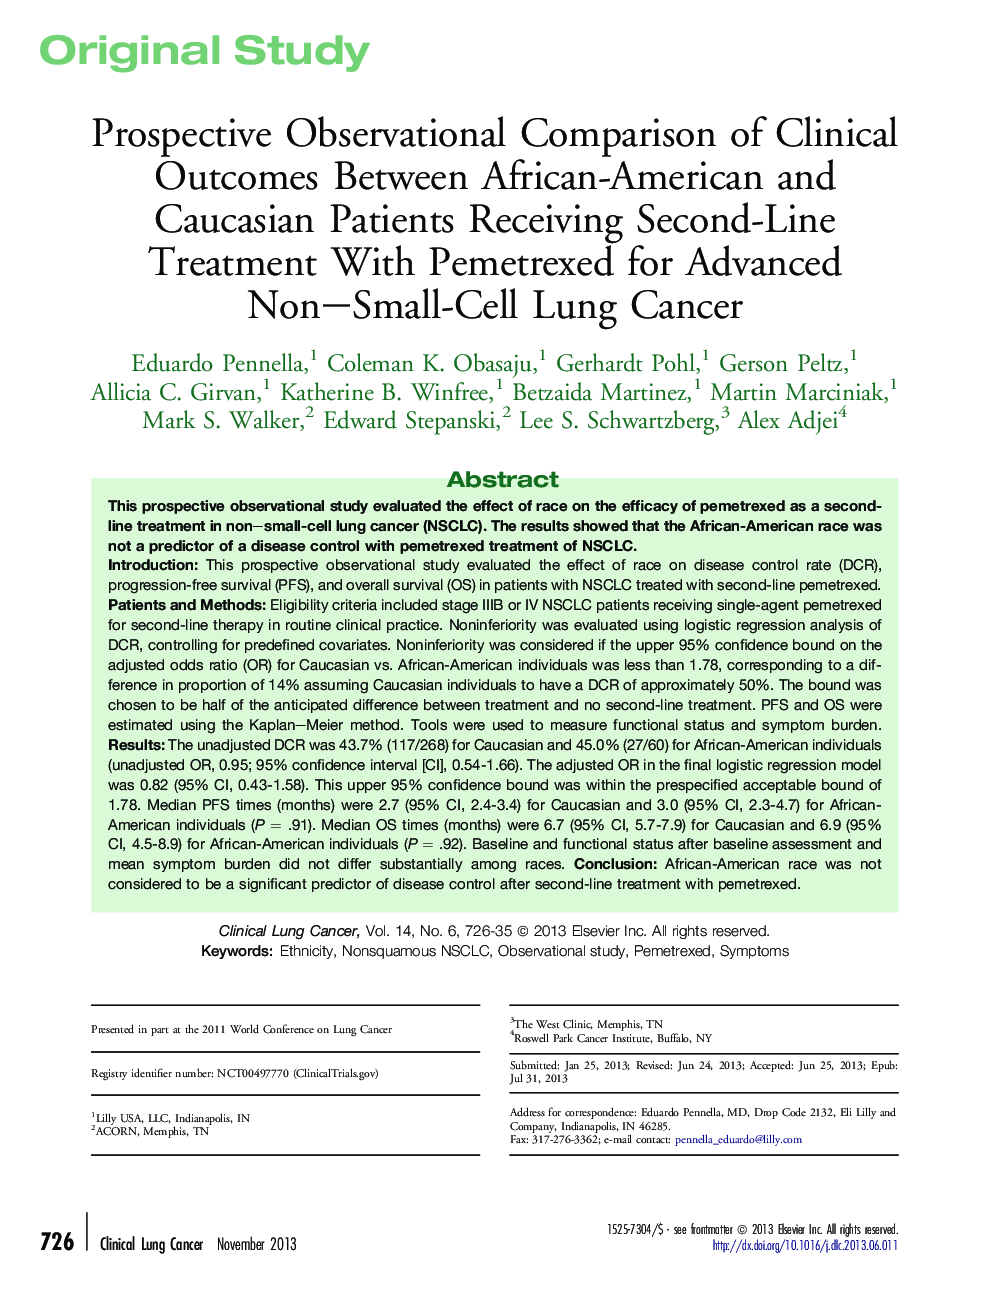 Prospective Observational Comparison of Clinical Outcomes Between African-American and Caucasian Patients Receiving Second-Line Treatment With Pemetrexed for Advanced Non–Small-Cell Lung Cancer 